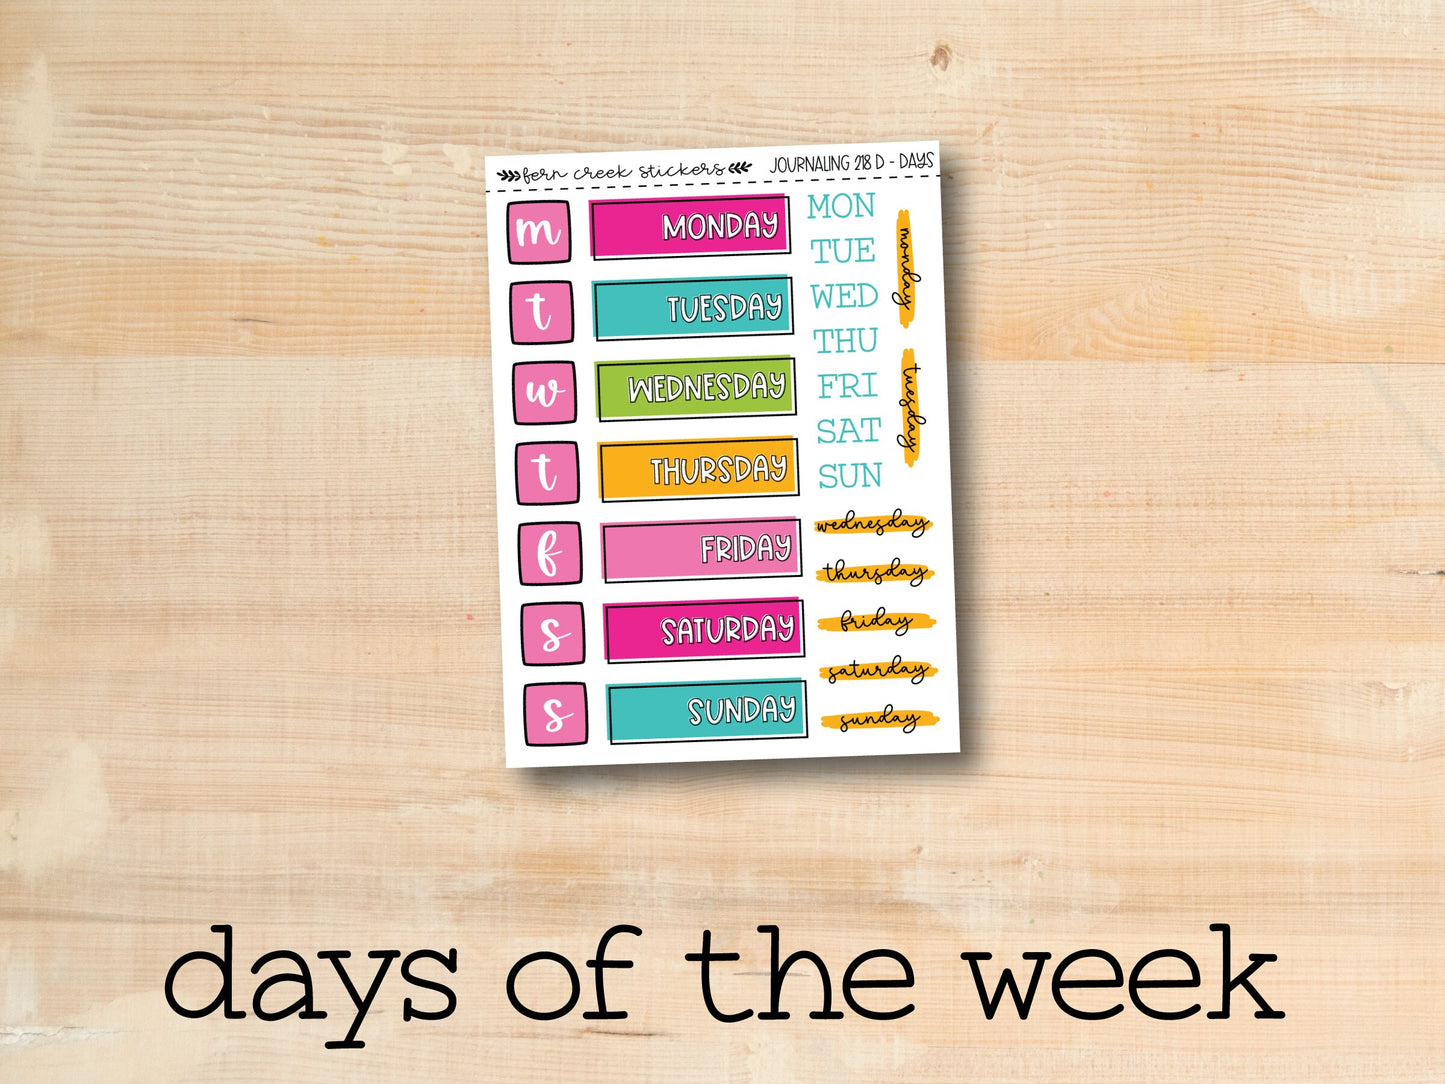 the days of the week sticker on a wooden surface